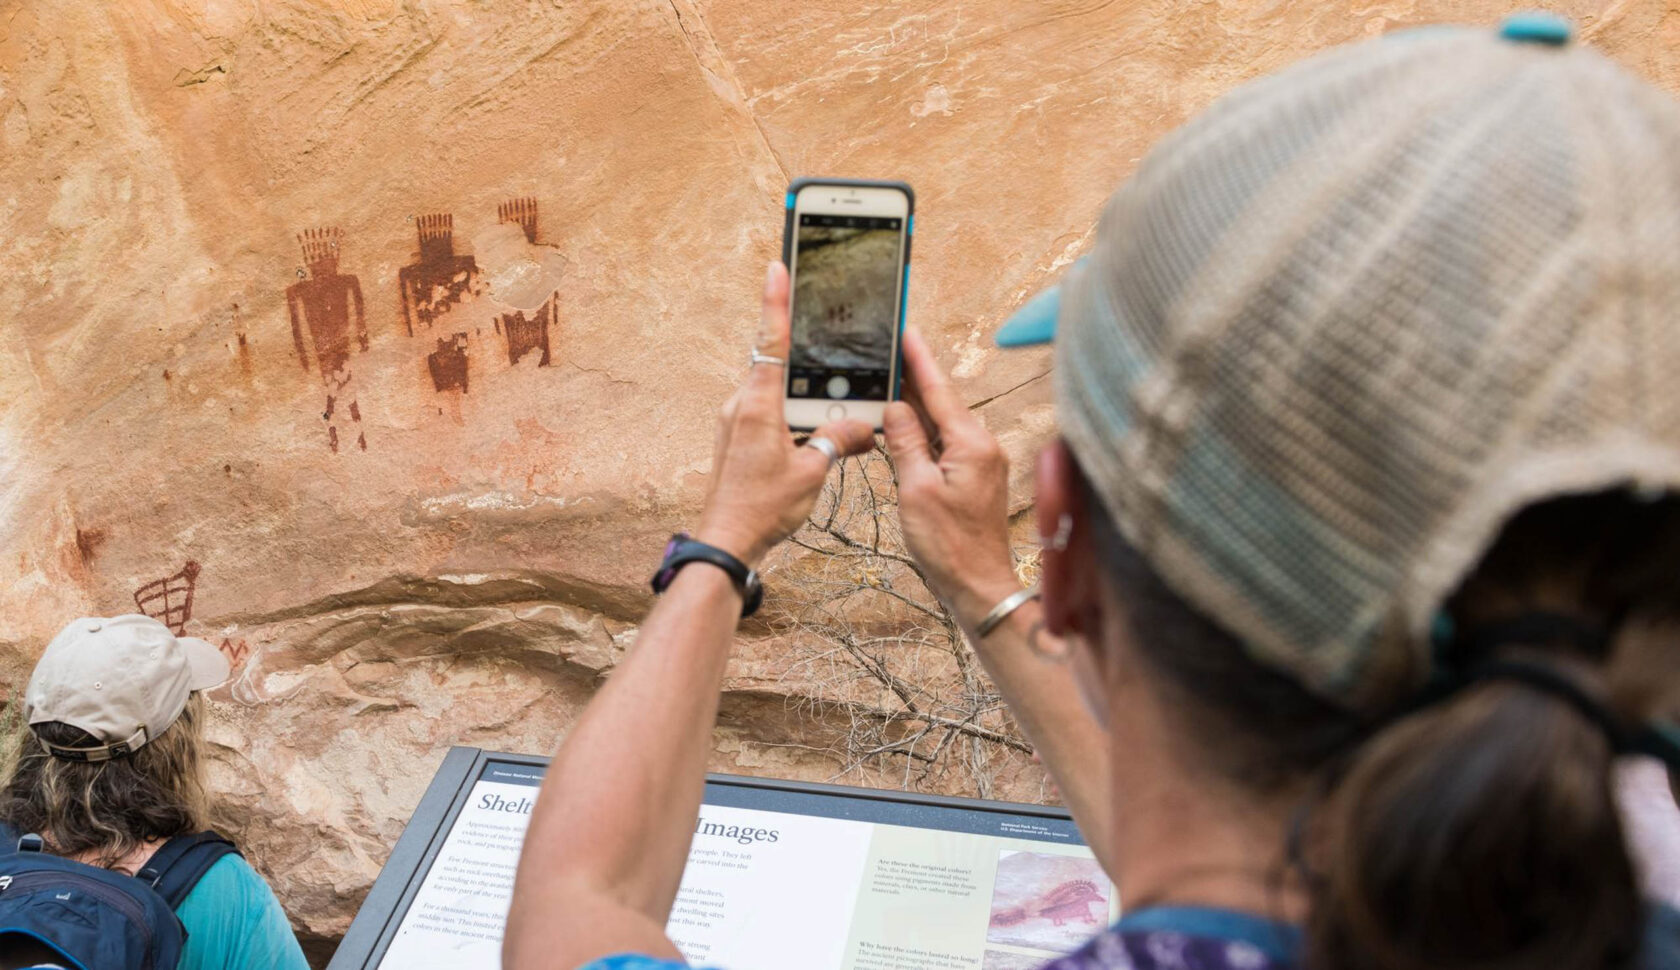 An OARS guest uses her smartphone to capture a photo of Native American rock art on a Gates of Lodore rafting trip.